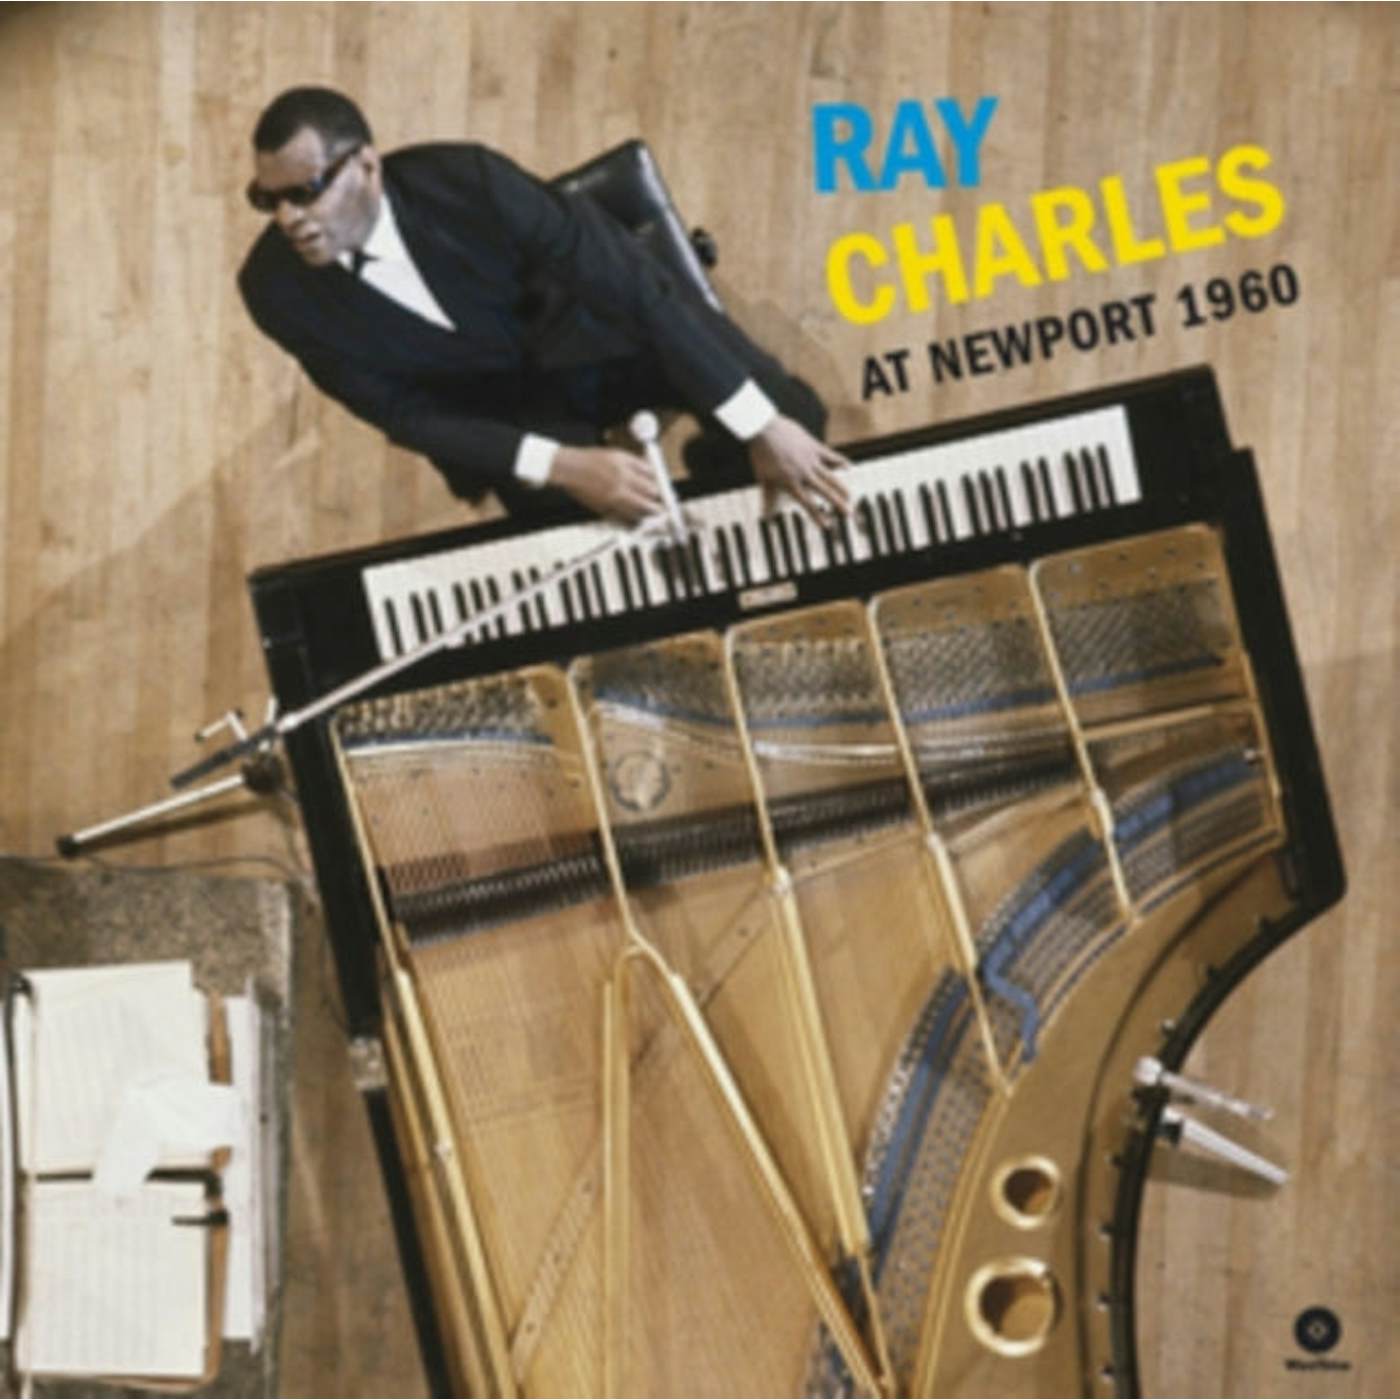 Ray Charles LP Vinyl Record - At Newport 19 60 (The Complete Concert)